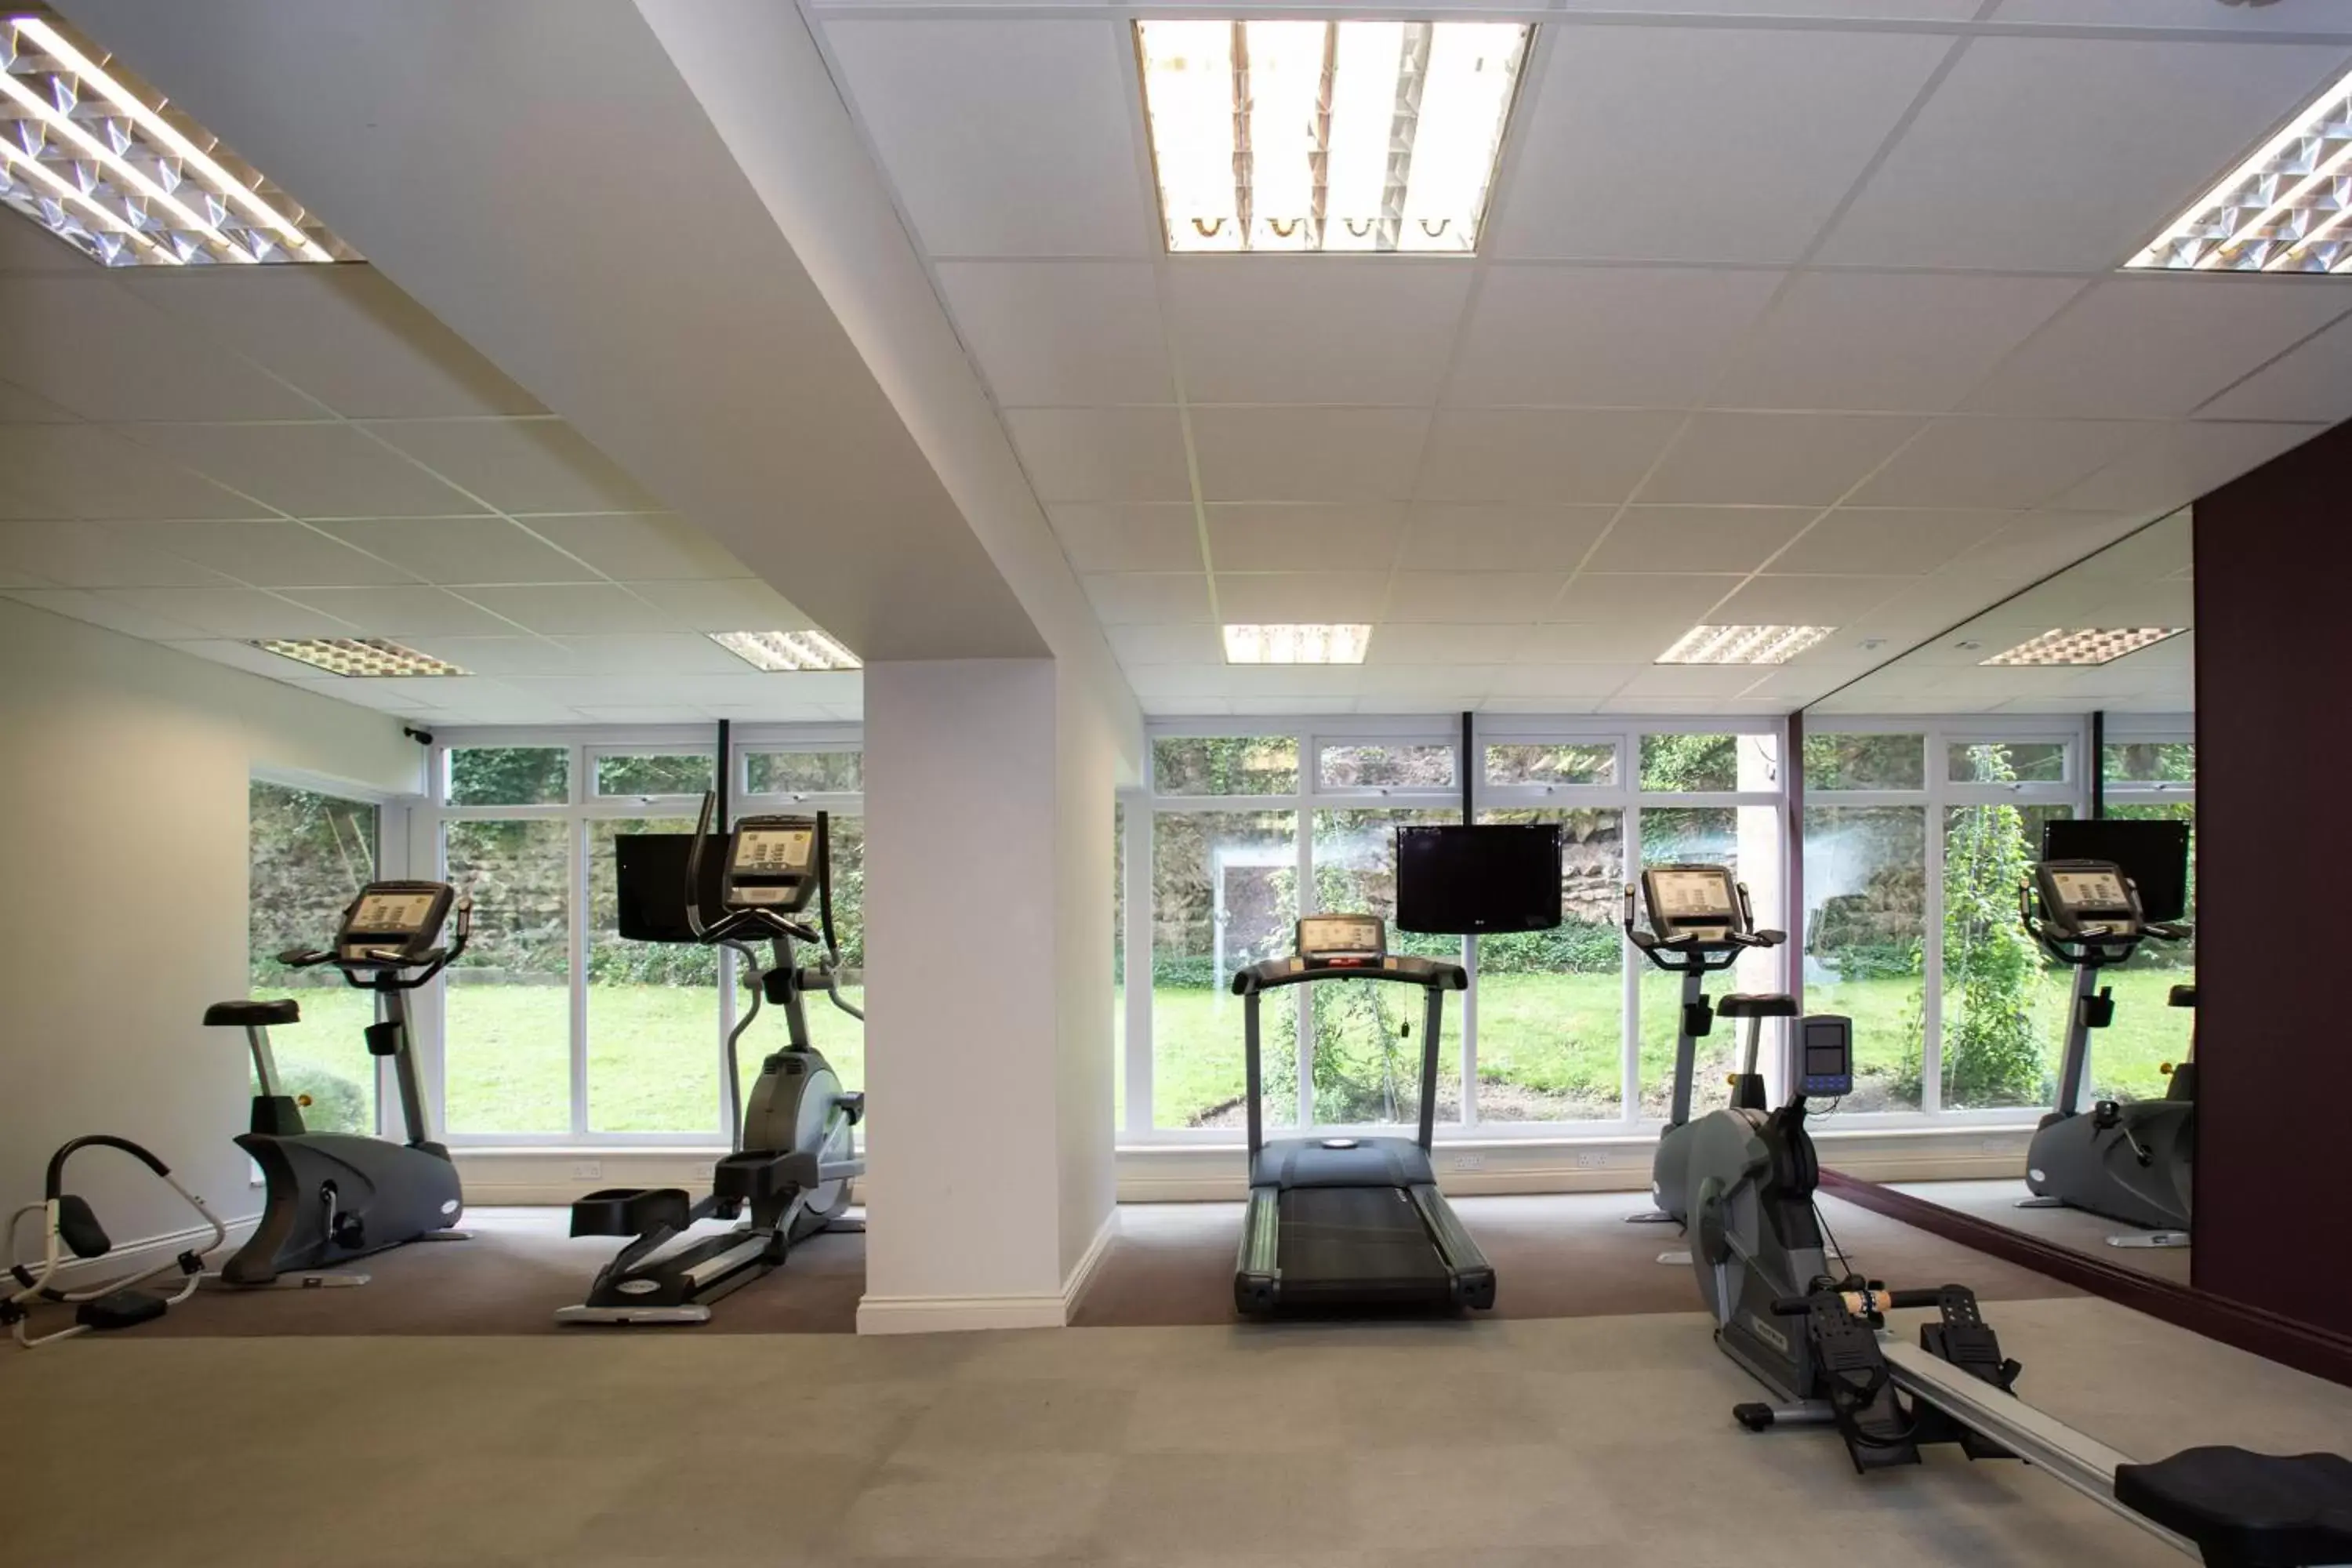 Fitness centre/facilities, Fitness Center/Facilities in The Lincoln Hotel